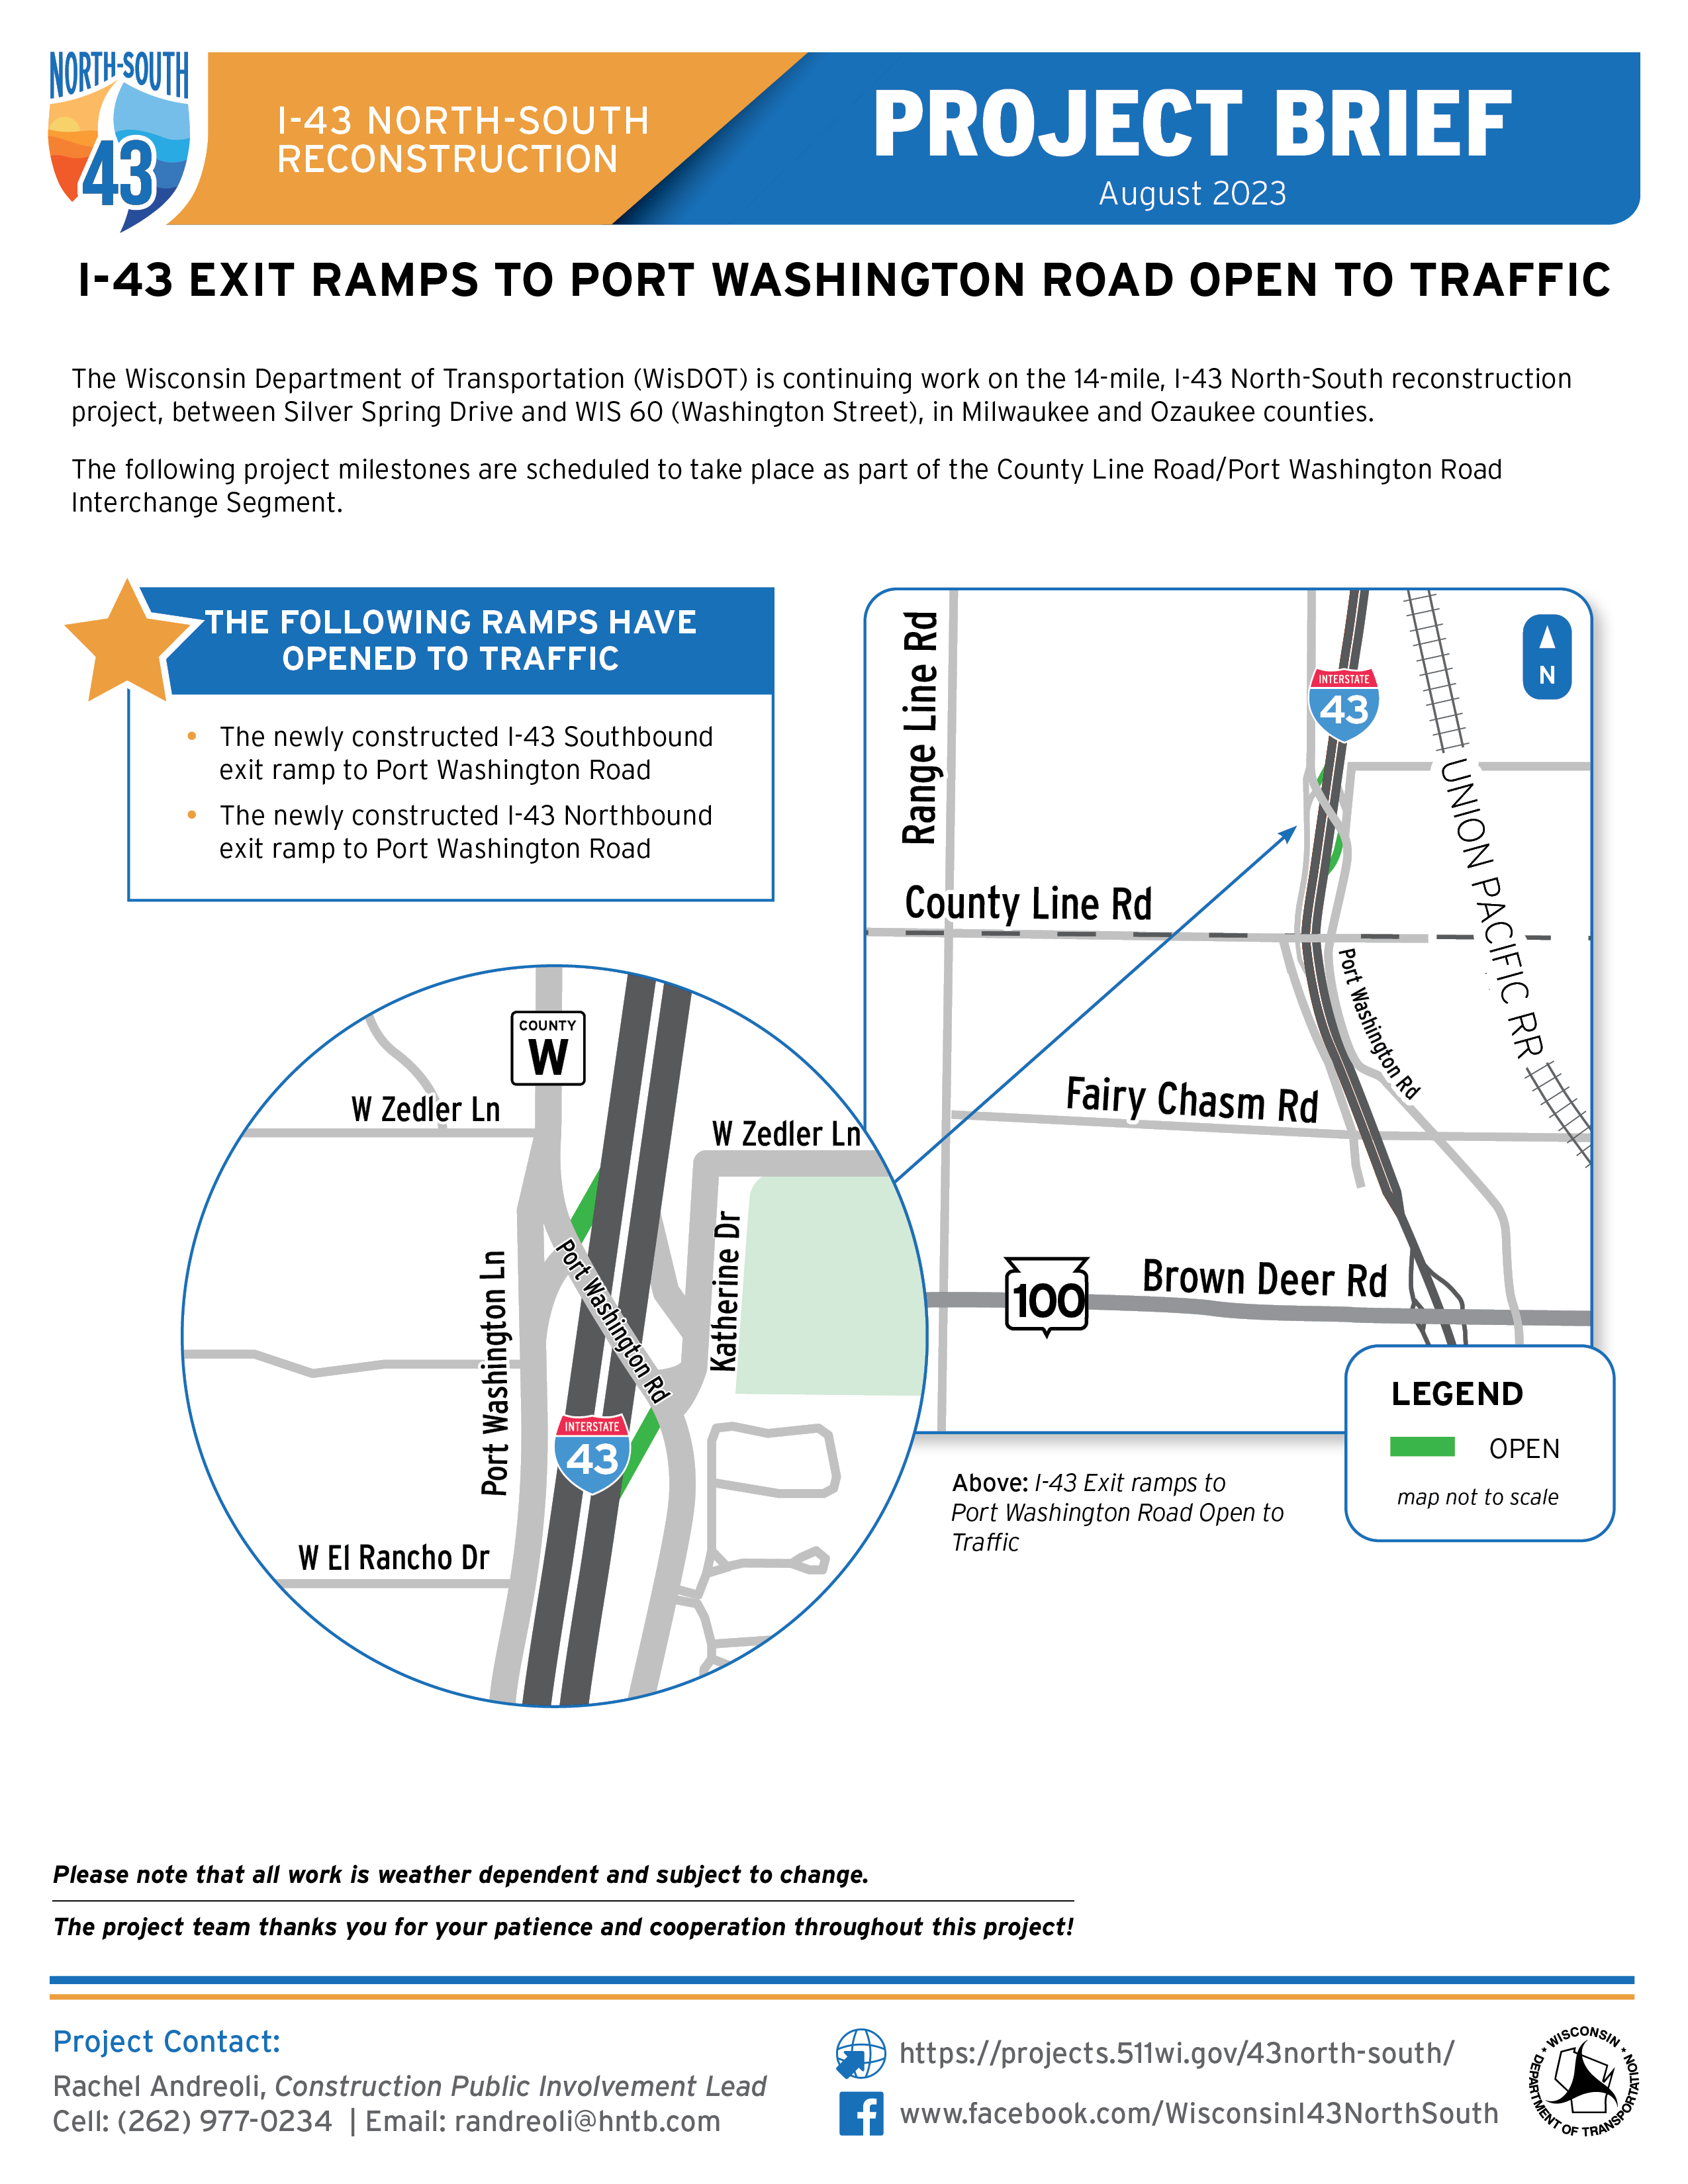 August 17, I-43 Exit Ramps to Port Washington Road Open to Traffic